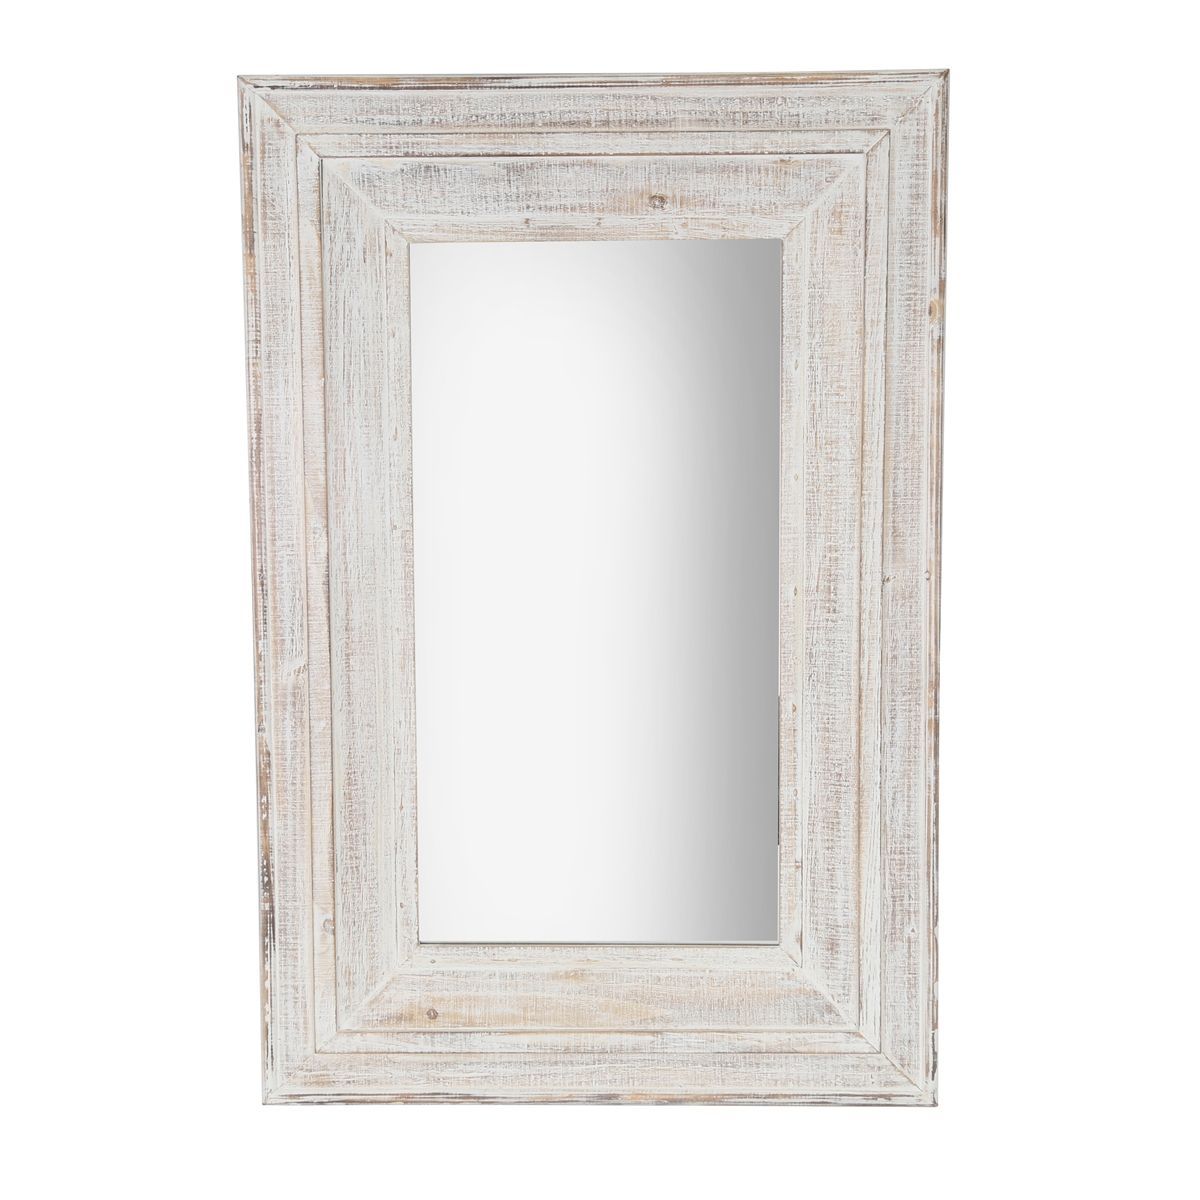 Antique White Wood Frame Wall Mirror | #sagebrookhome Www (View 3 of 15)